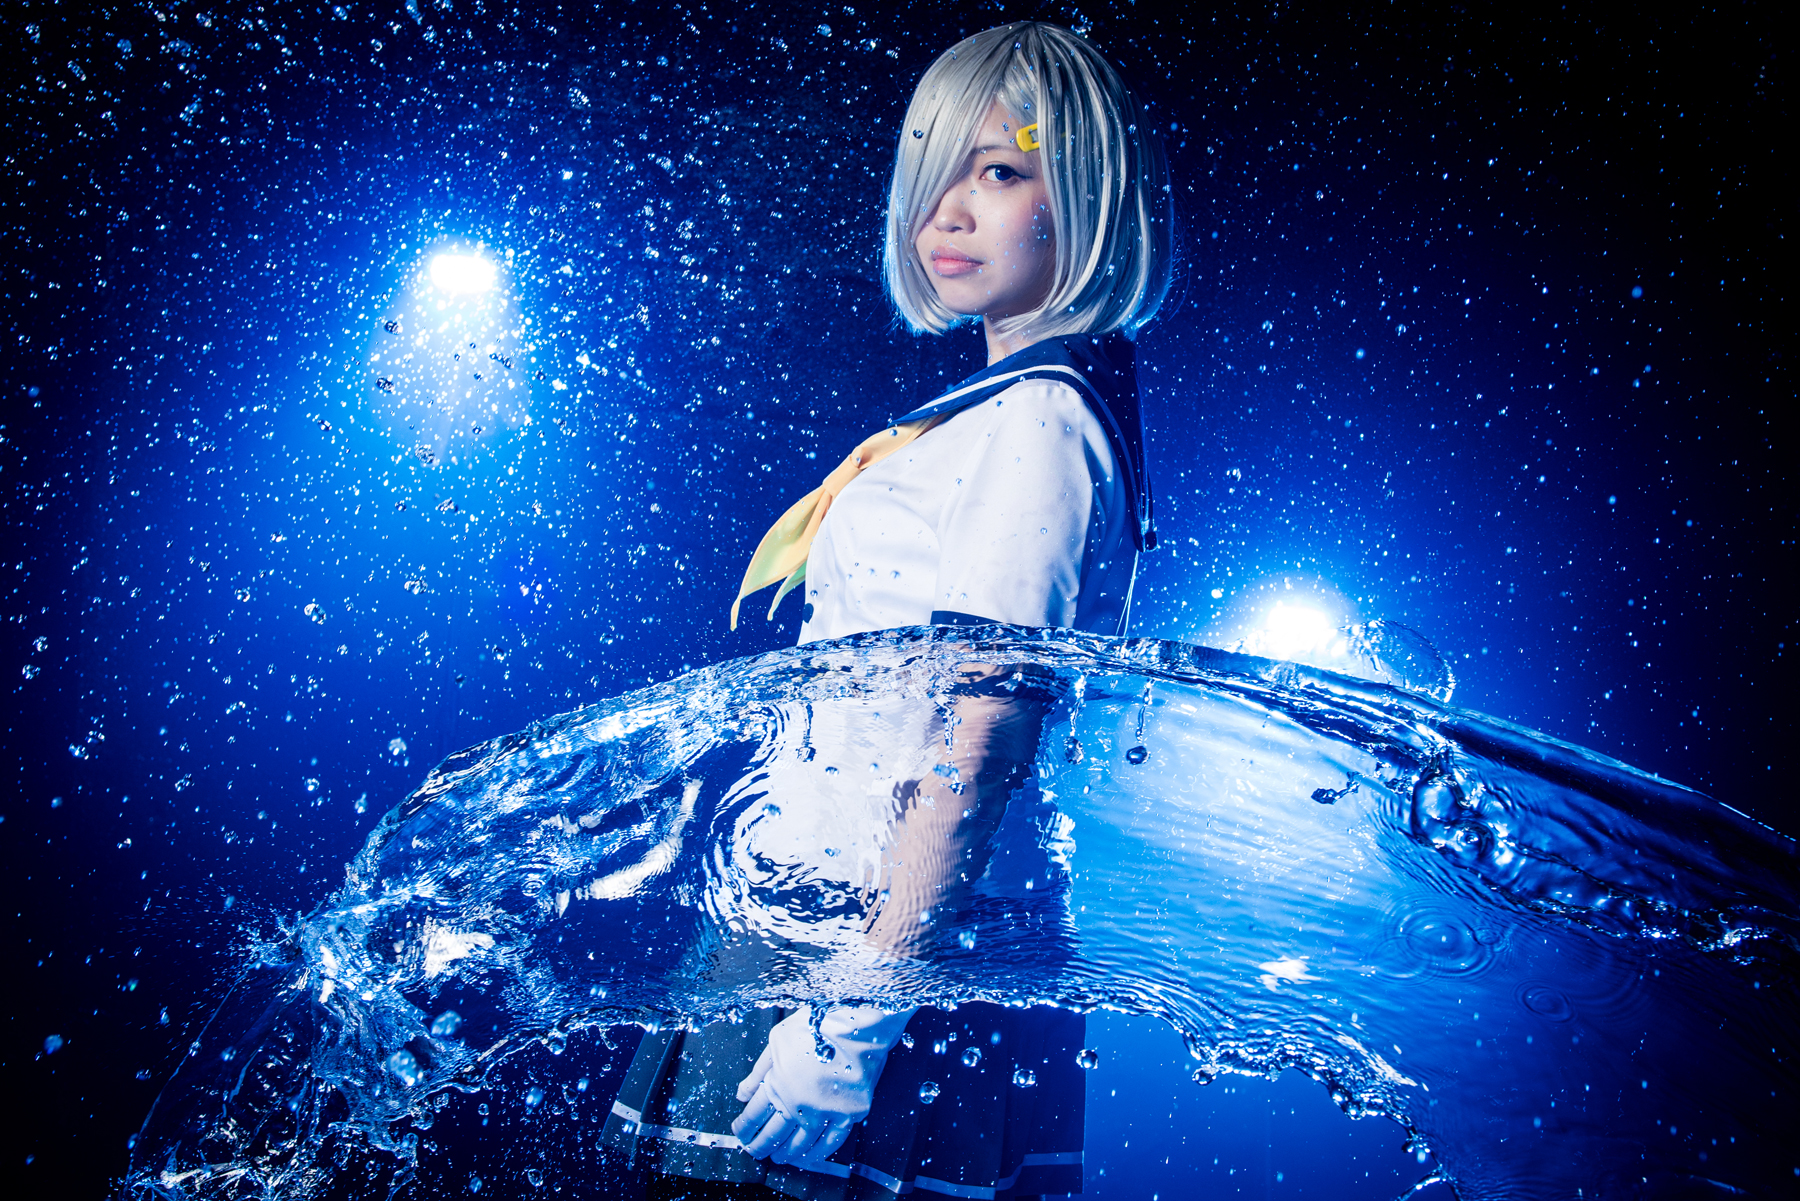 Real Water Makes Cosplay Wetter, I Mean Better